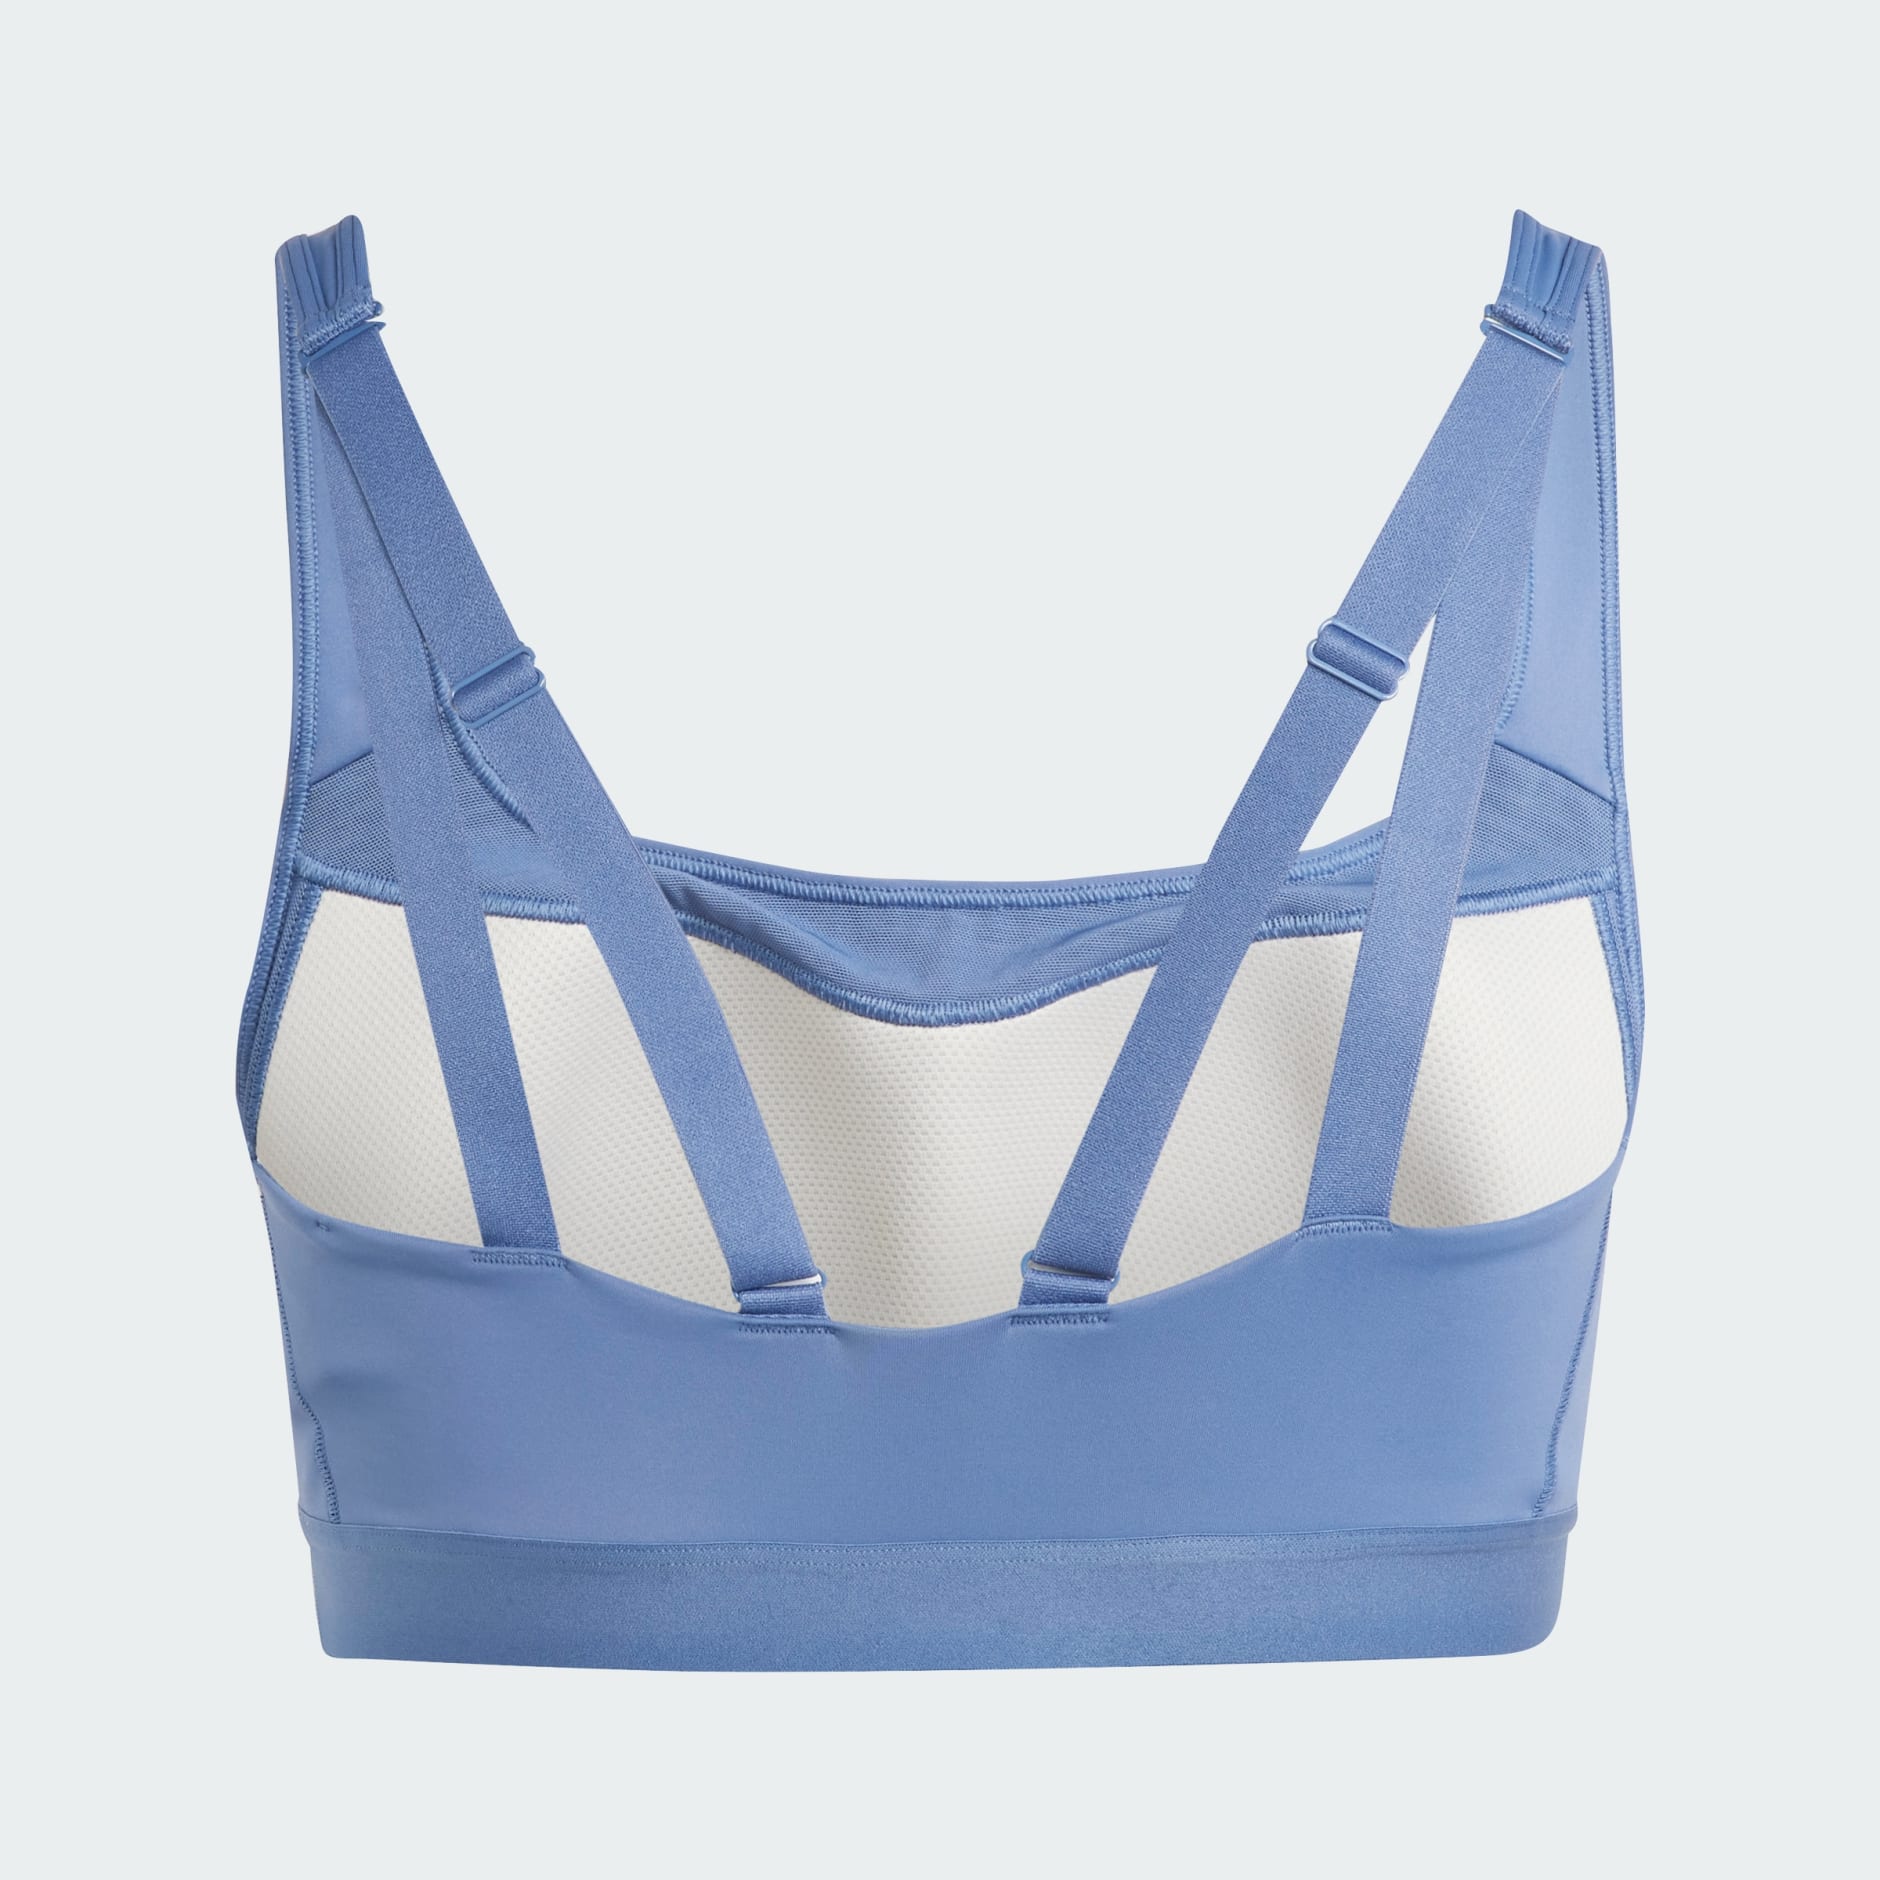 Turns out bras don't have to feel like a medieval torture device